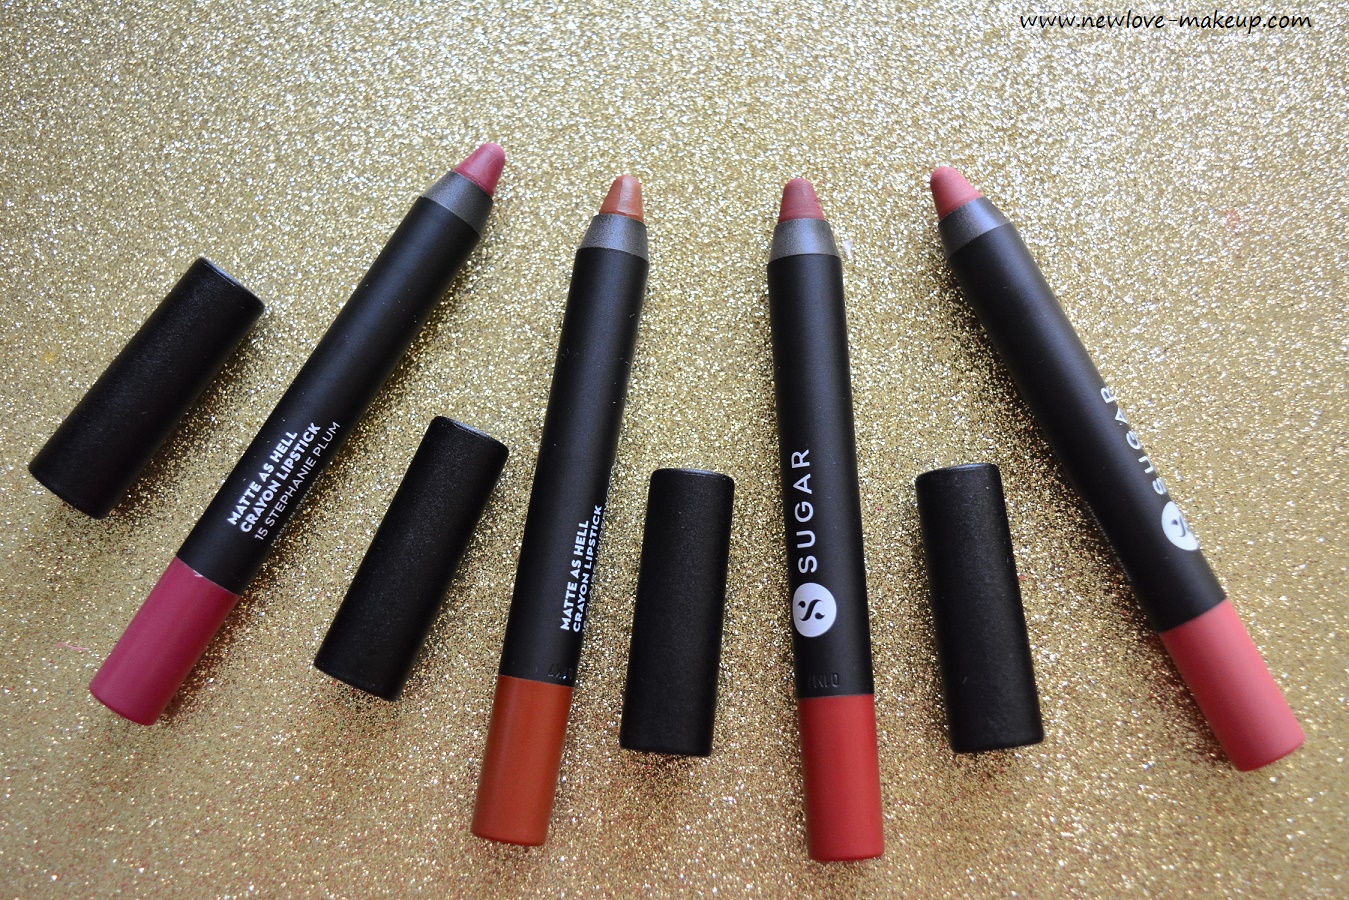 Swatches- New Shades 15 to 18 of Sugar Matte As Hell Lip Crayons